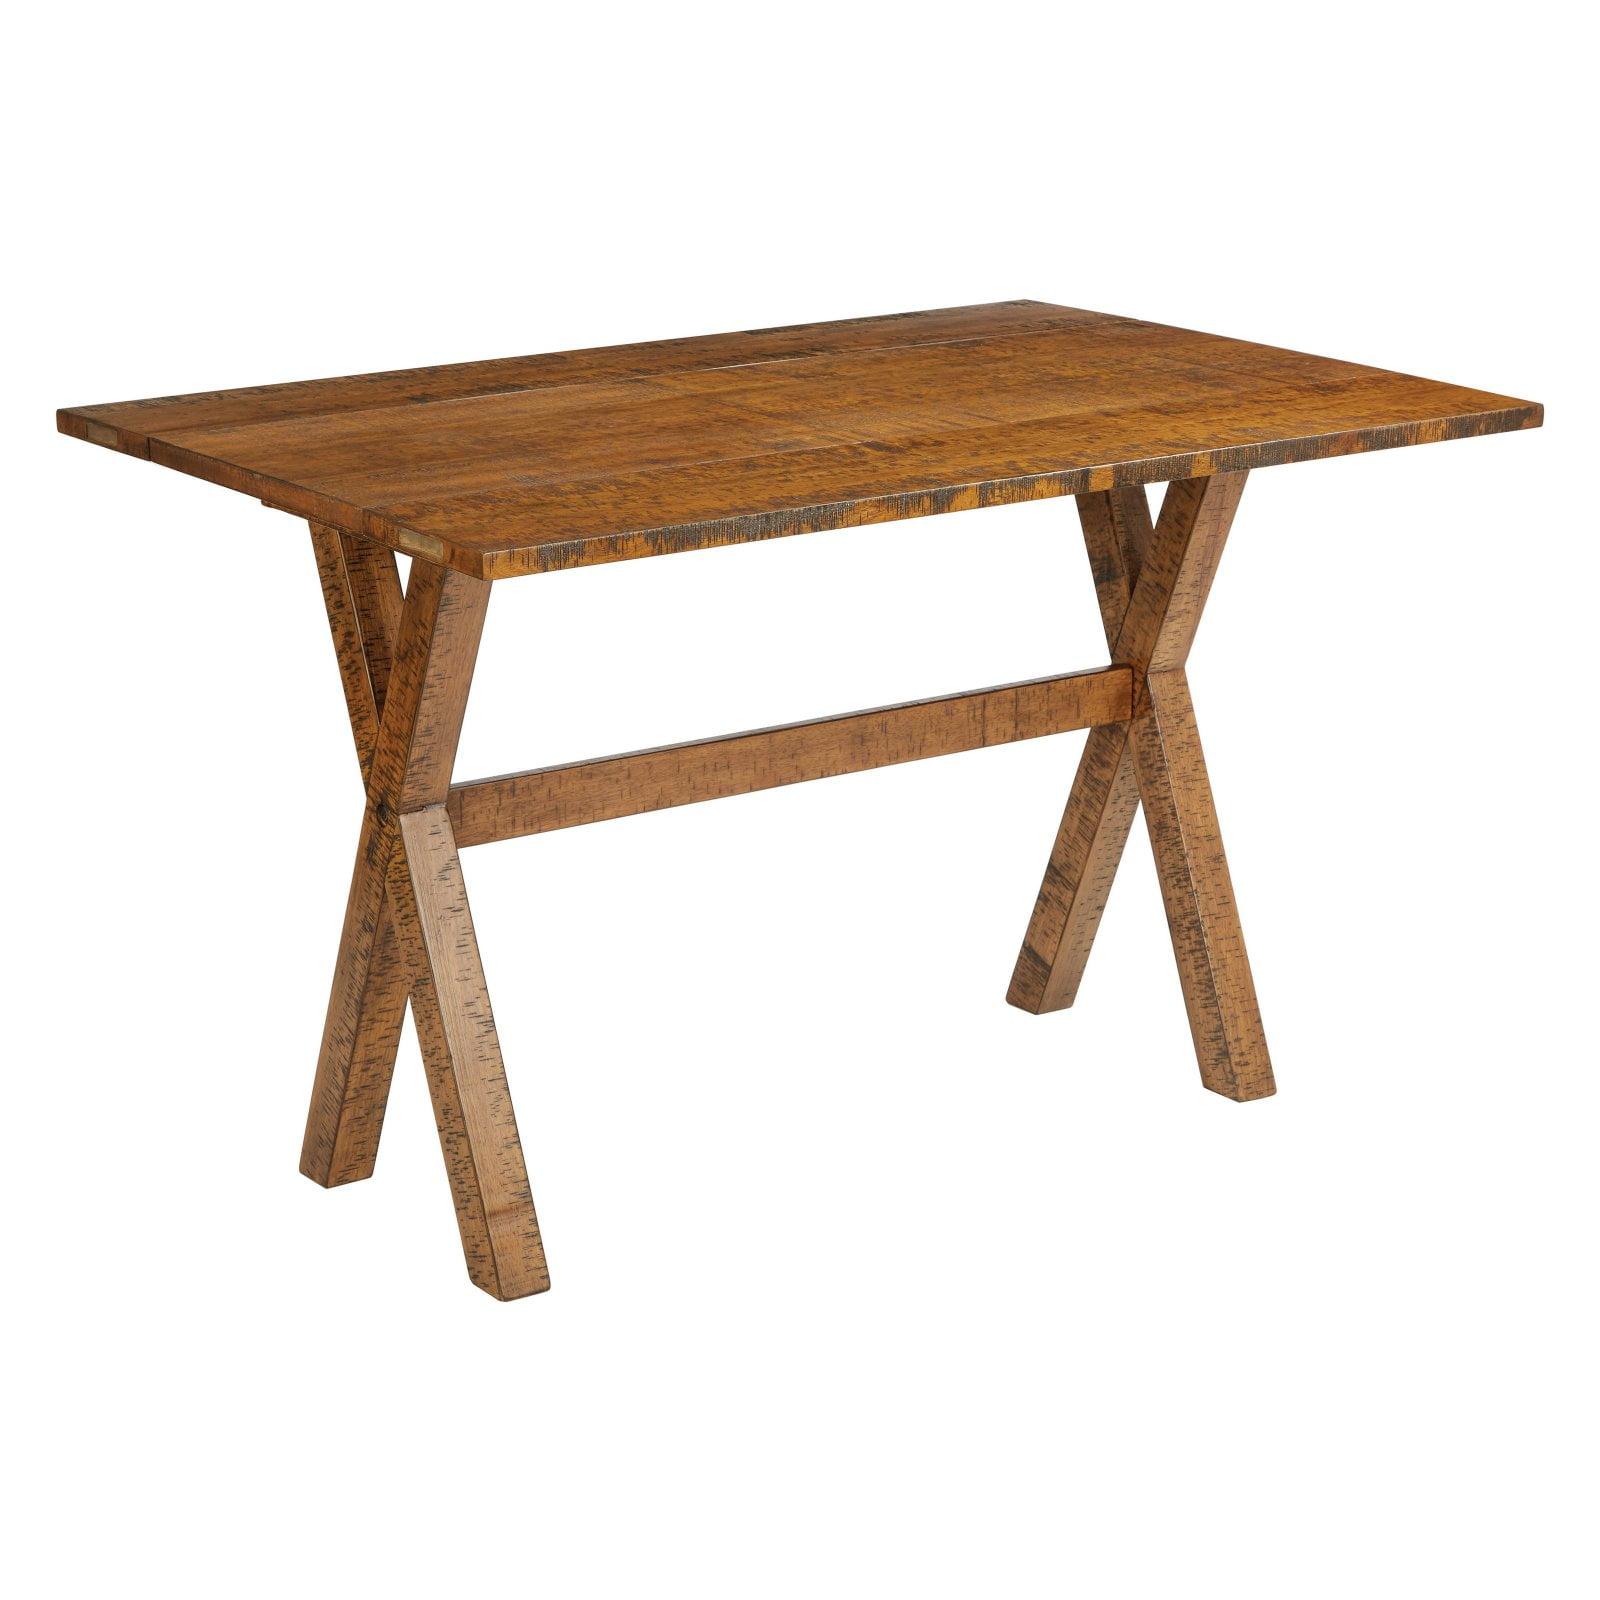 Farmhouse Rustic Reclaimed Wood Flip-Top Dining Table